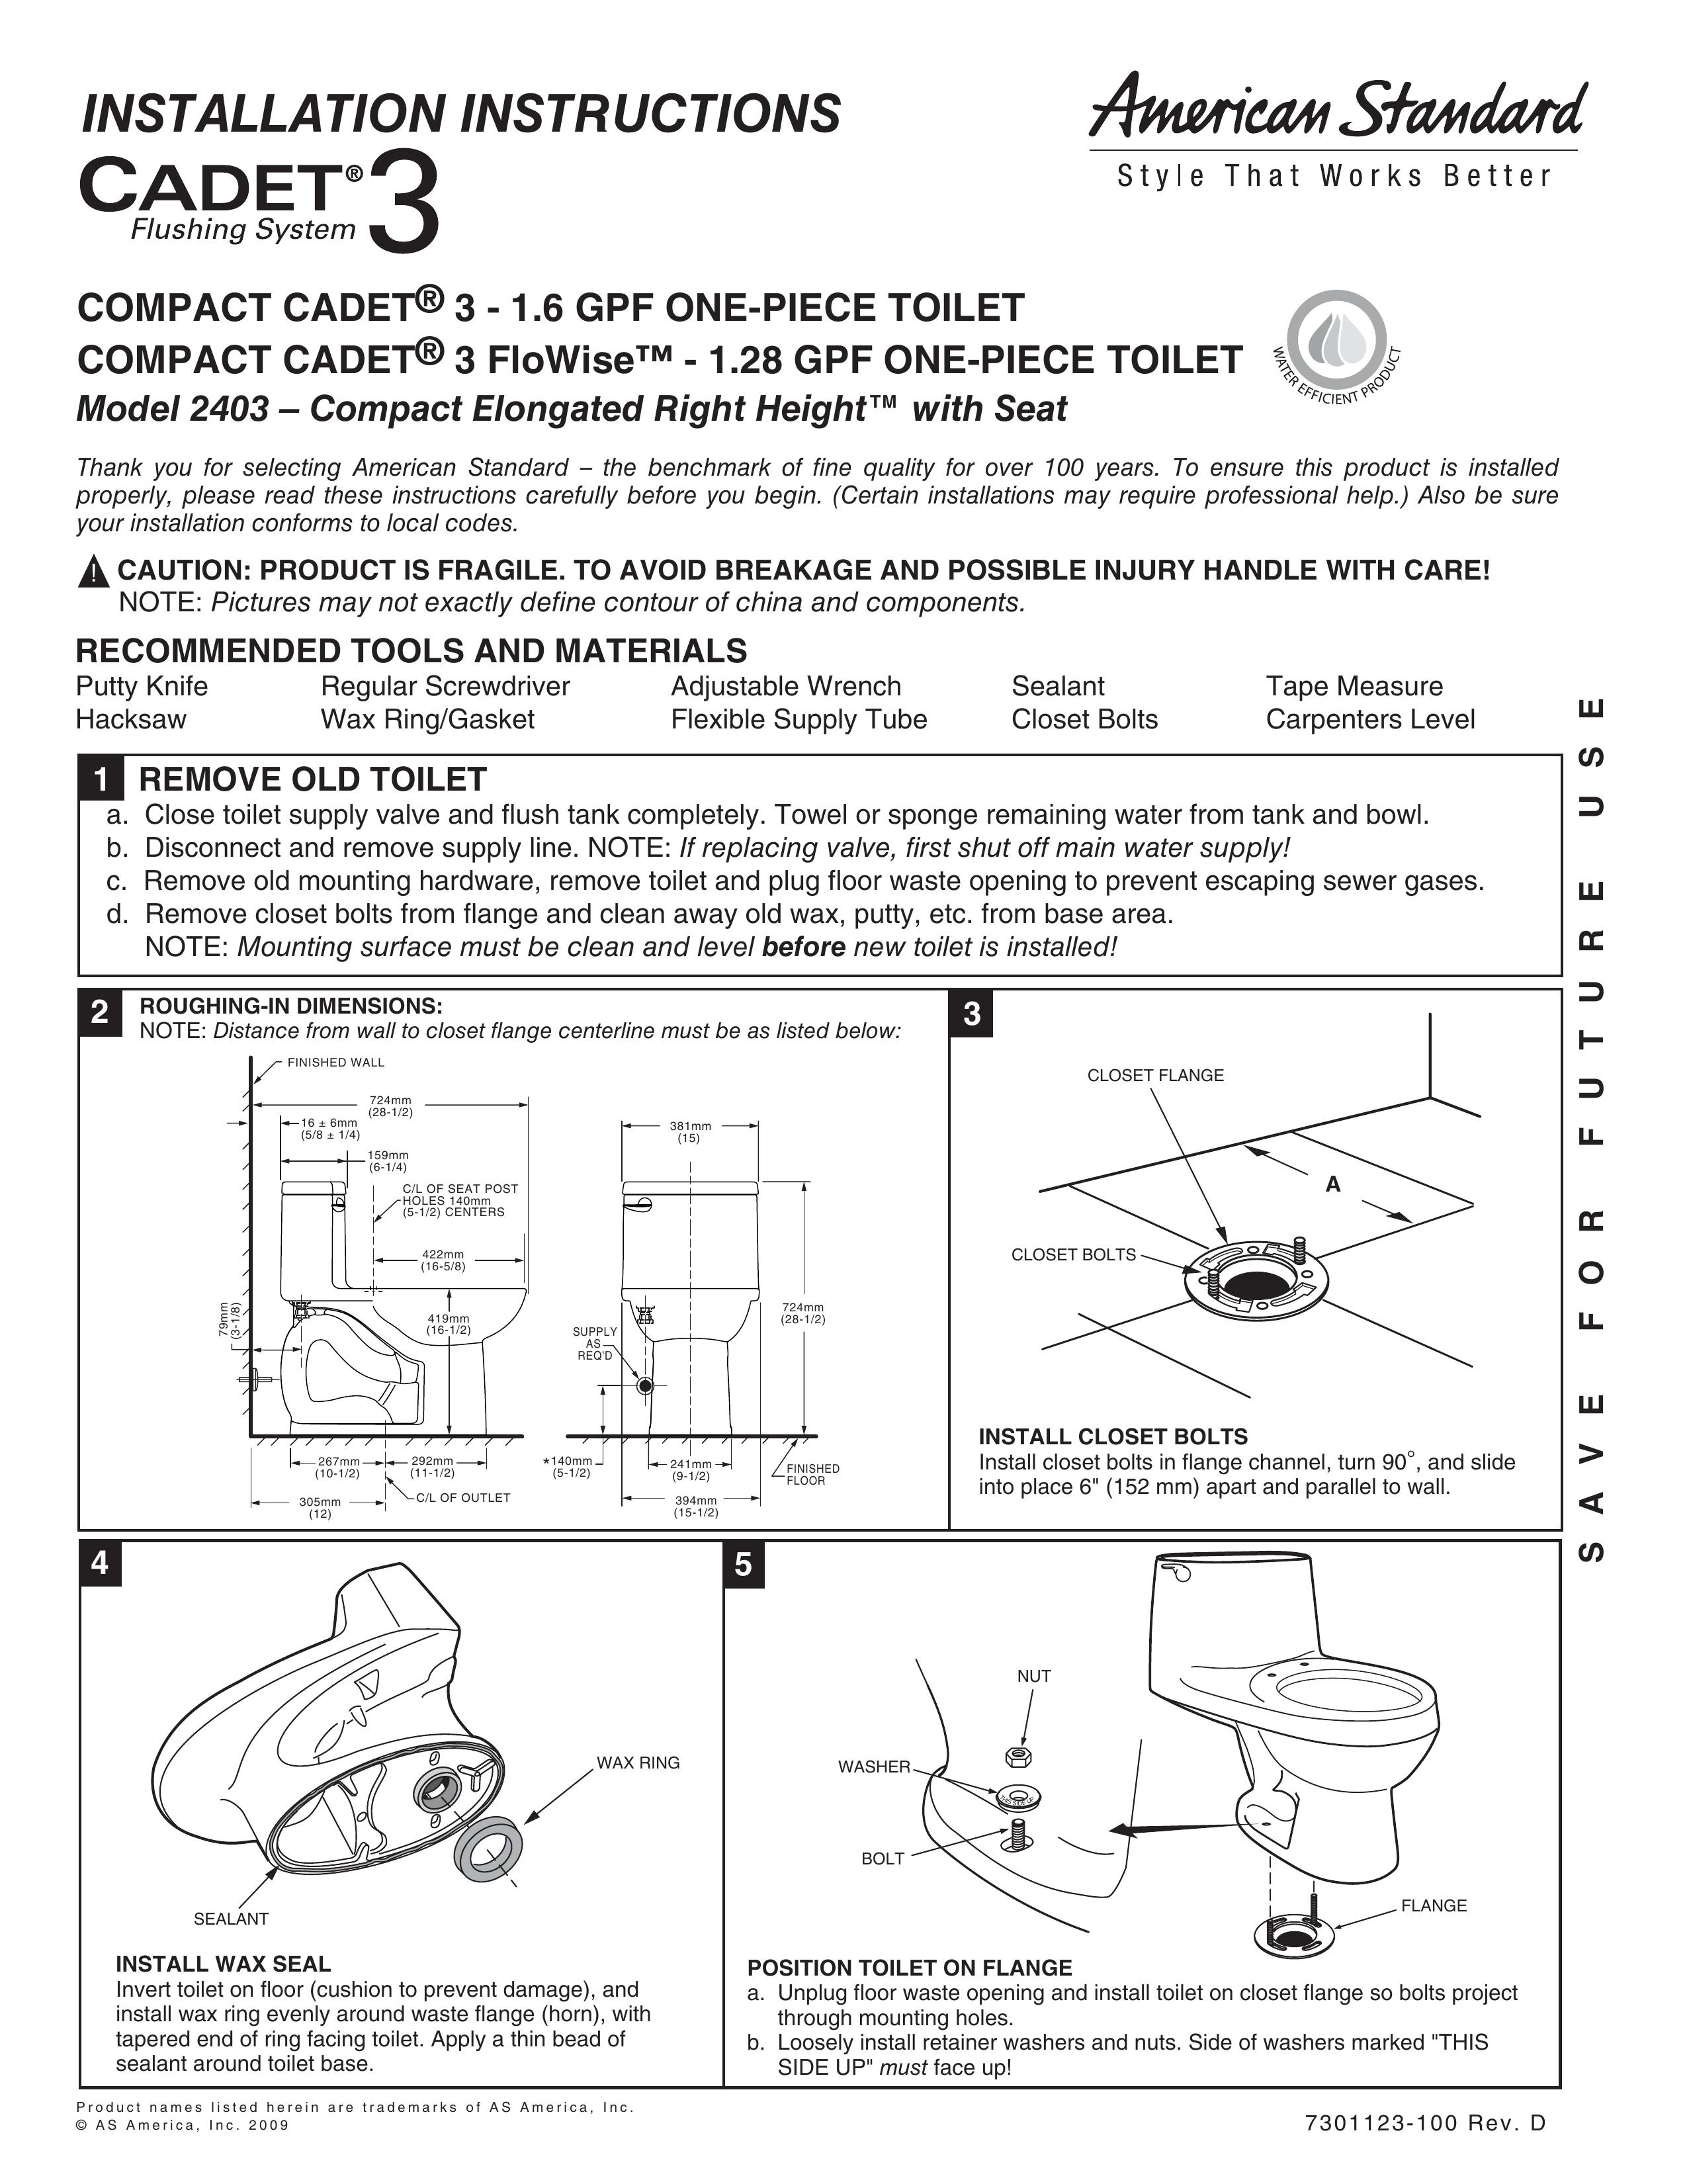 American Standard COMPACT CADET 3 - 1.6 GPF ONE-PIECE TOILET, COMPACT CADET 3 FloWise - 1.28 GPF ONE-PIECE TOILET Personal Lift User Manual